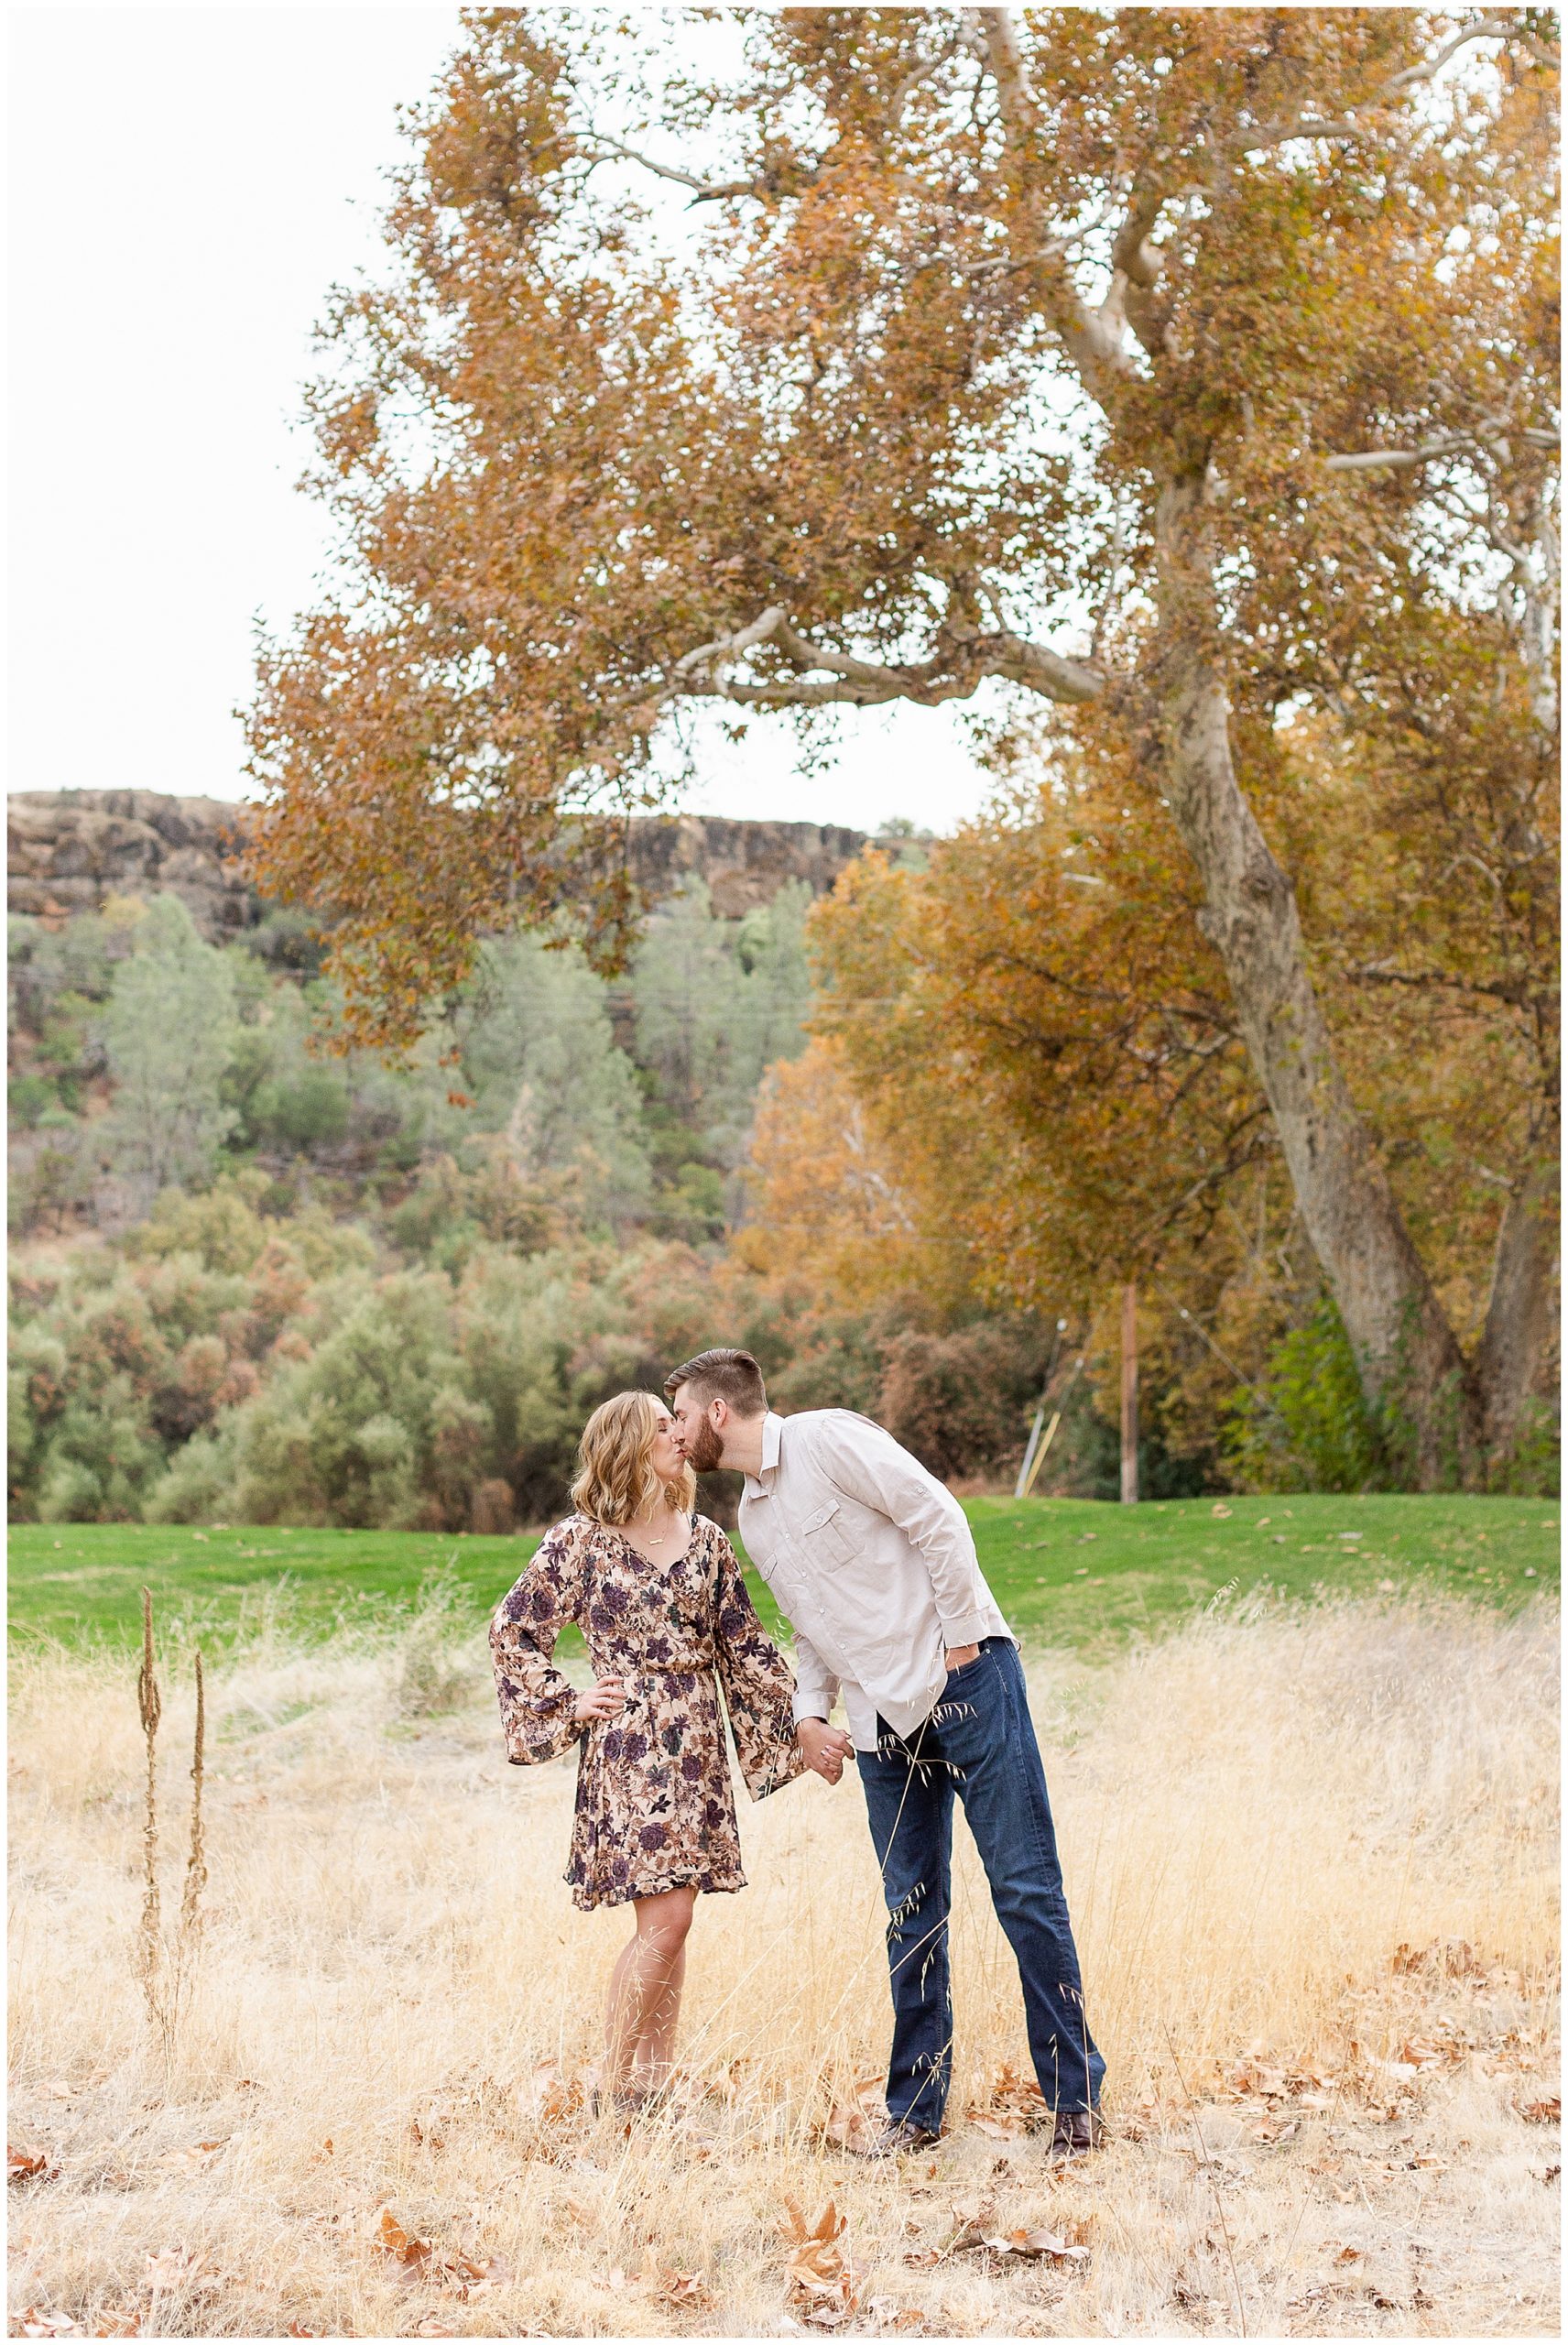 Bidwell Park Golf Course Chico CA Upper Park Couple Session Fall,